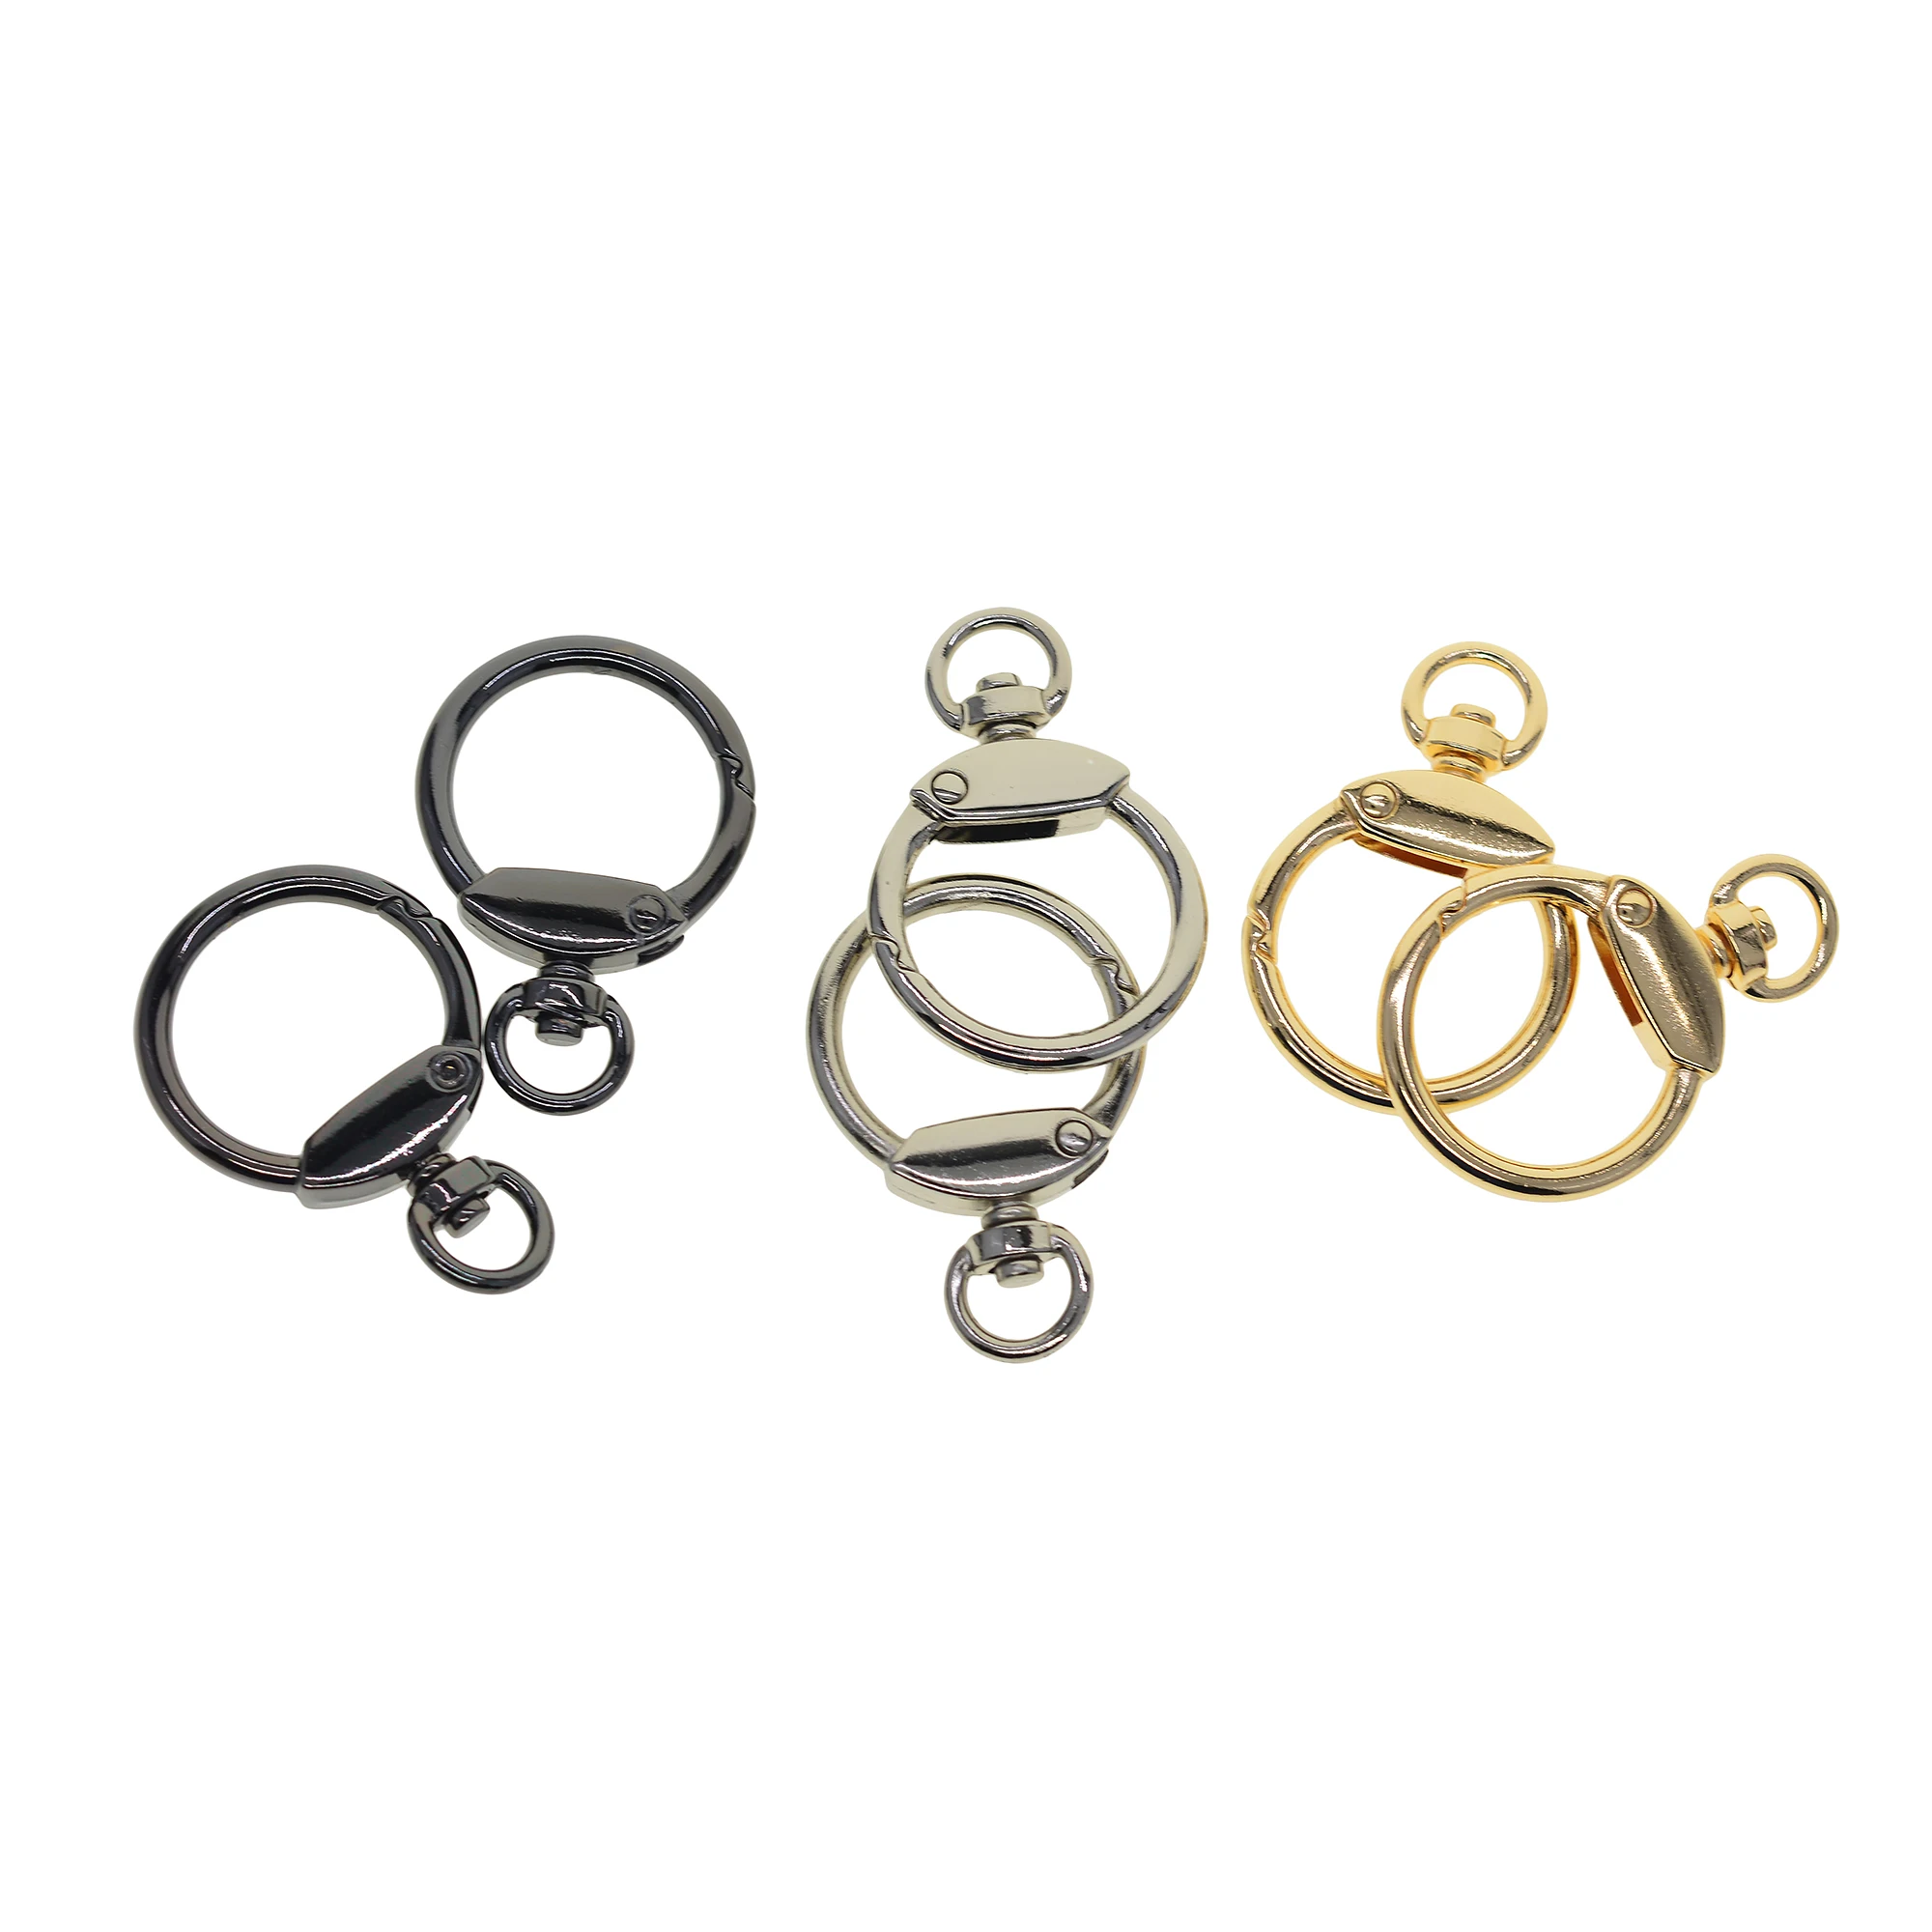 

2023 fashion fine metal alloy circle round snap Hook clasp with Swivel connectors purses keychains Necklace DIY bag strap